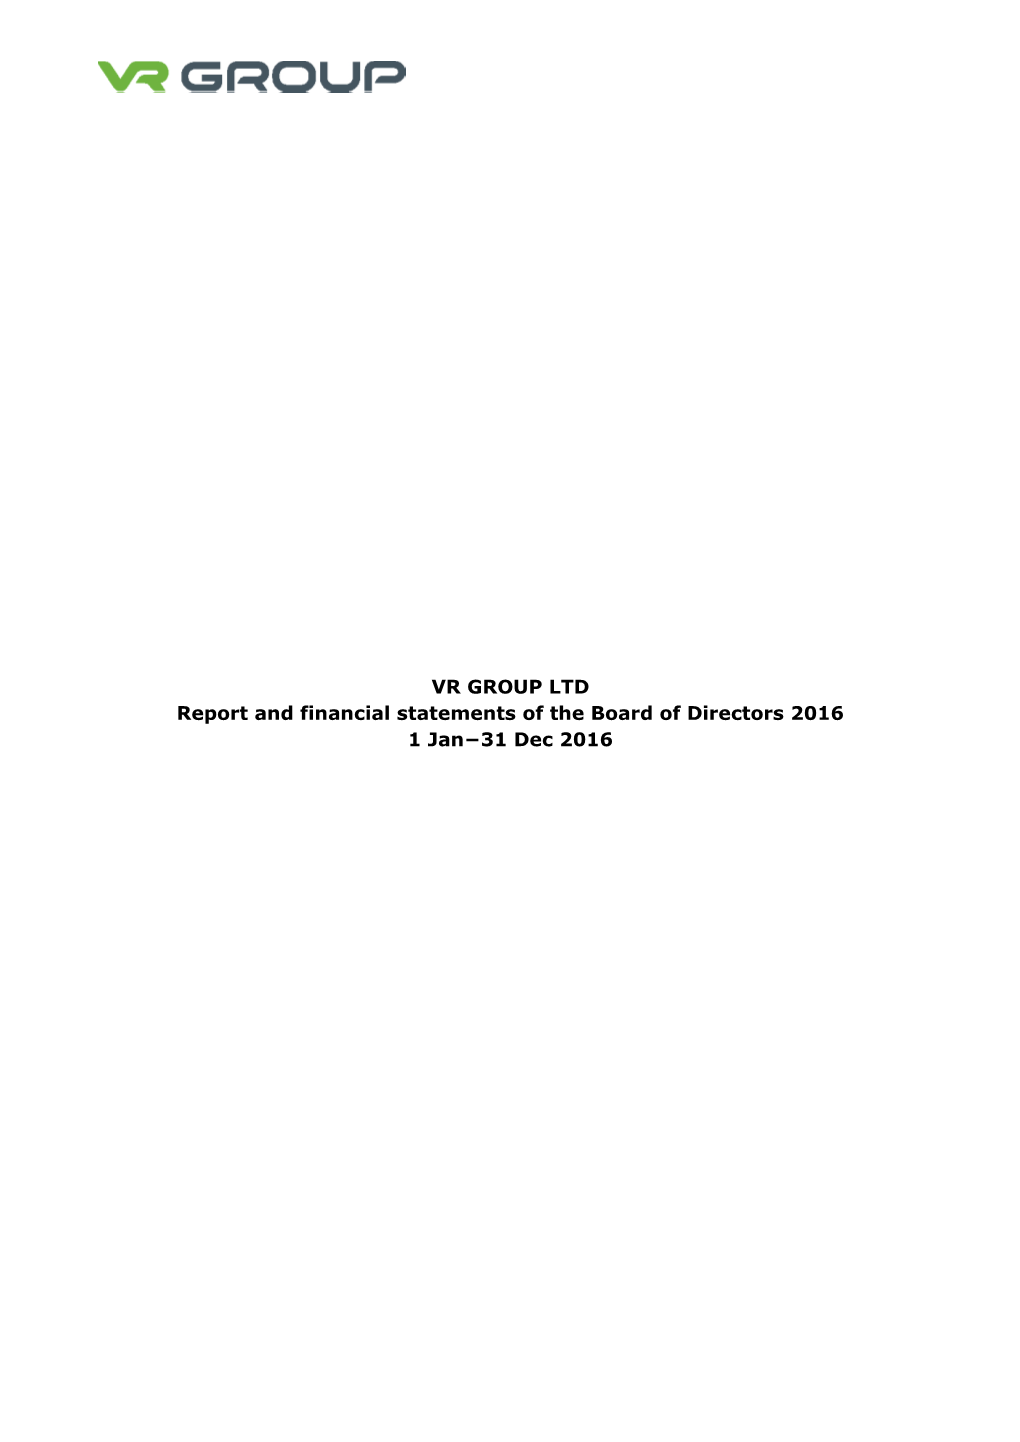 VR GROUP LTD Report and Financial Statements of the Board of Directors 2016 1 Jan−31 Dec 2016 2